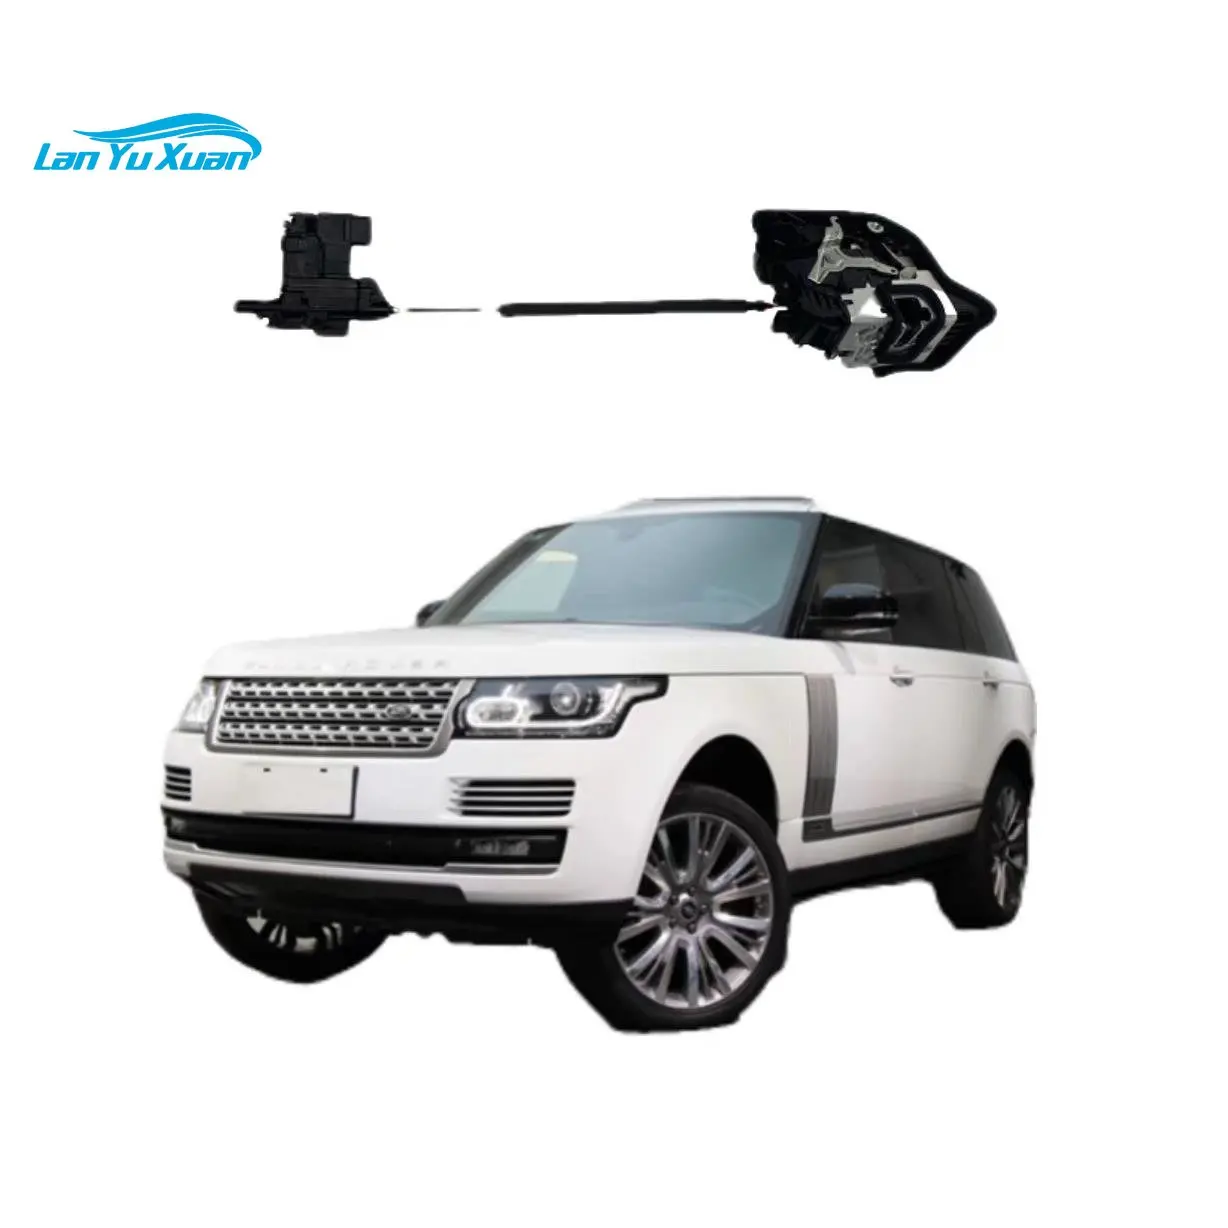 Vehicle Door Soft Power Lock System Power Liftgate Plug And Play Suction Electric For Land Rover cable organizer storage bag system kit case travel usb data cable earphone wire pen power bank sd card digital gadget device bag